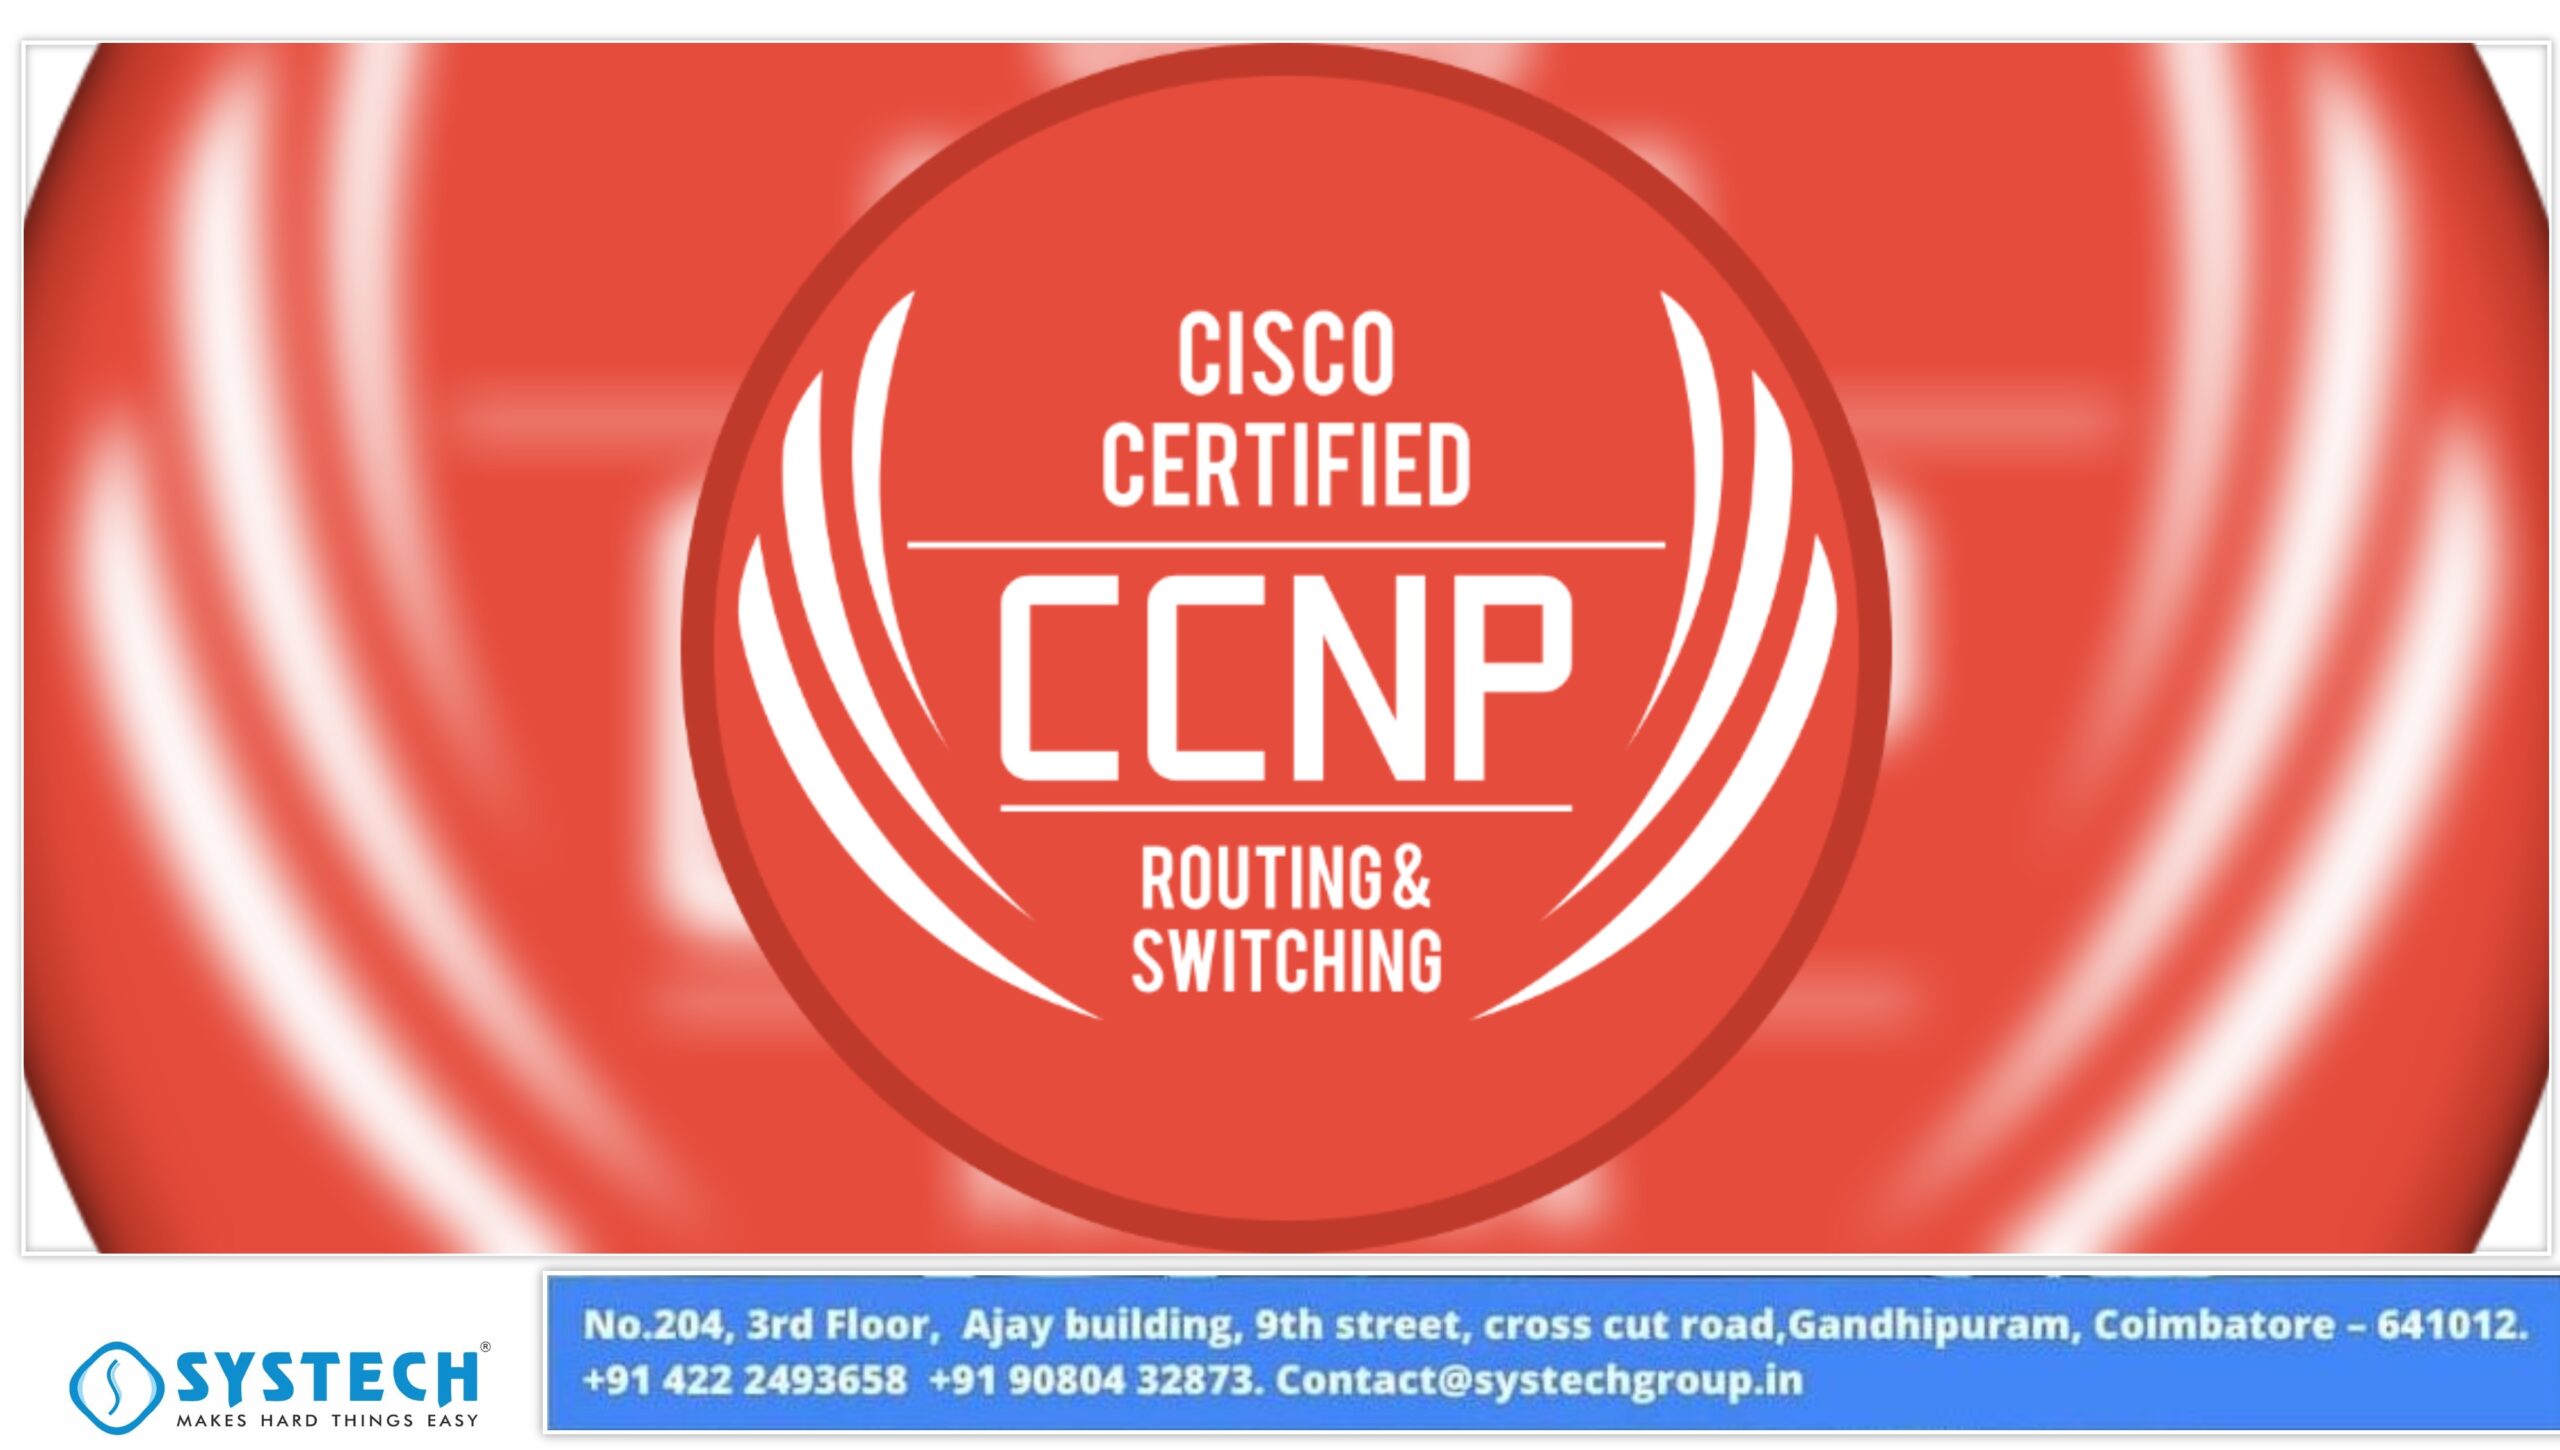 which is the best ccnp training institute in Coimbatore